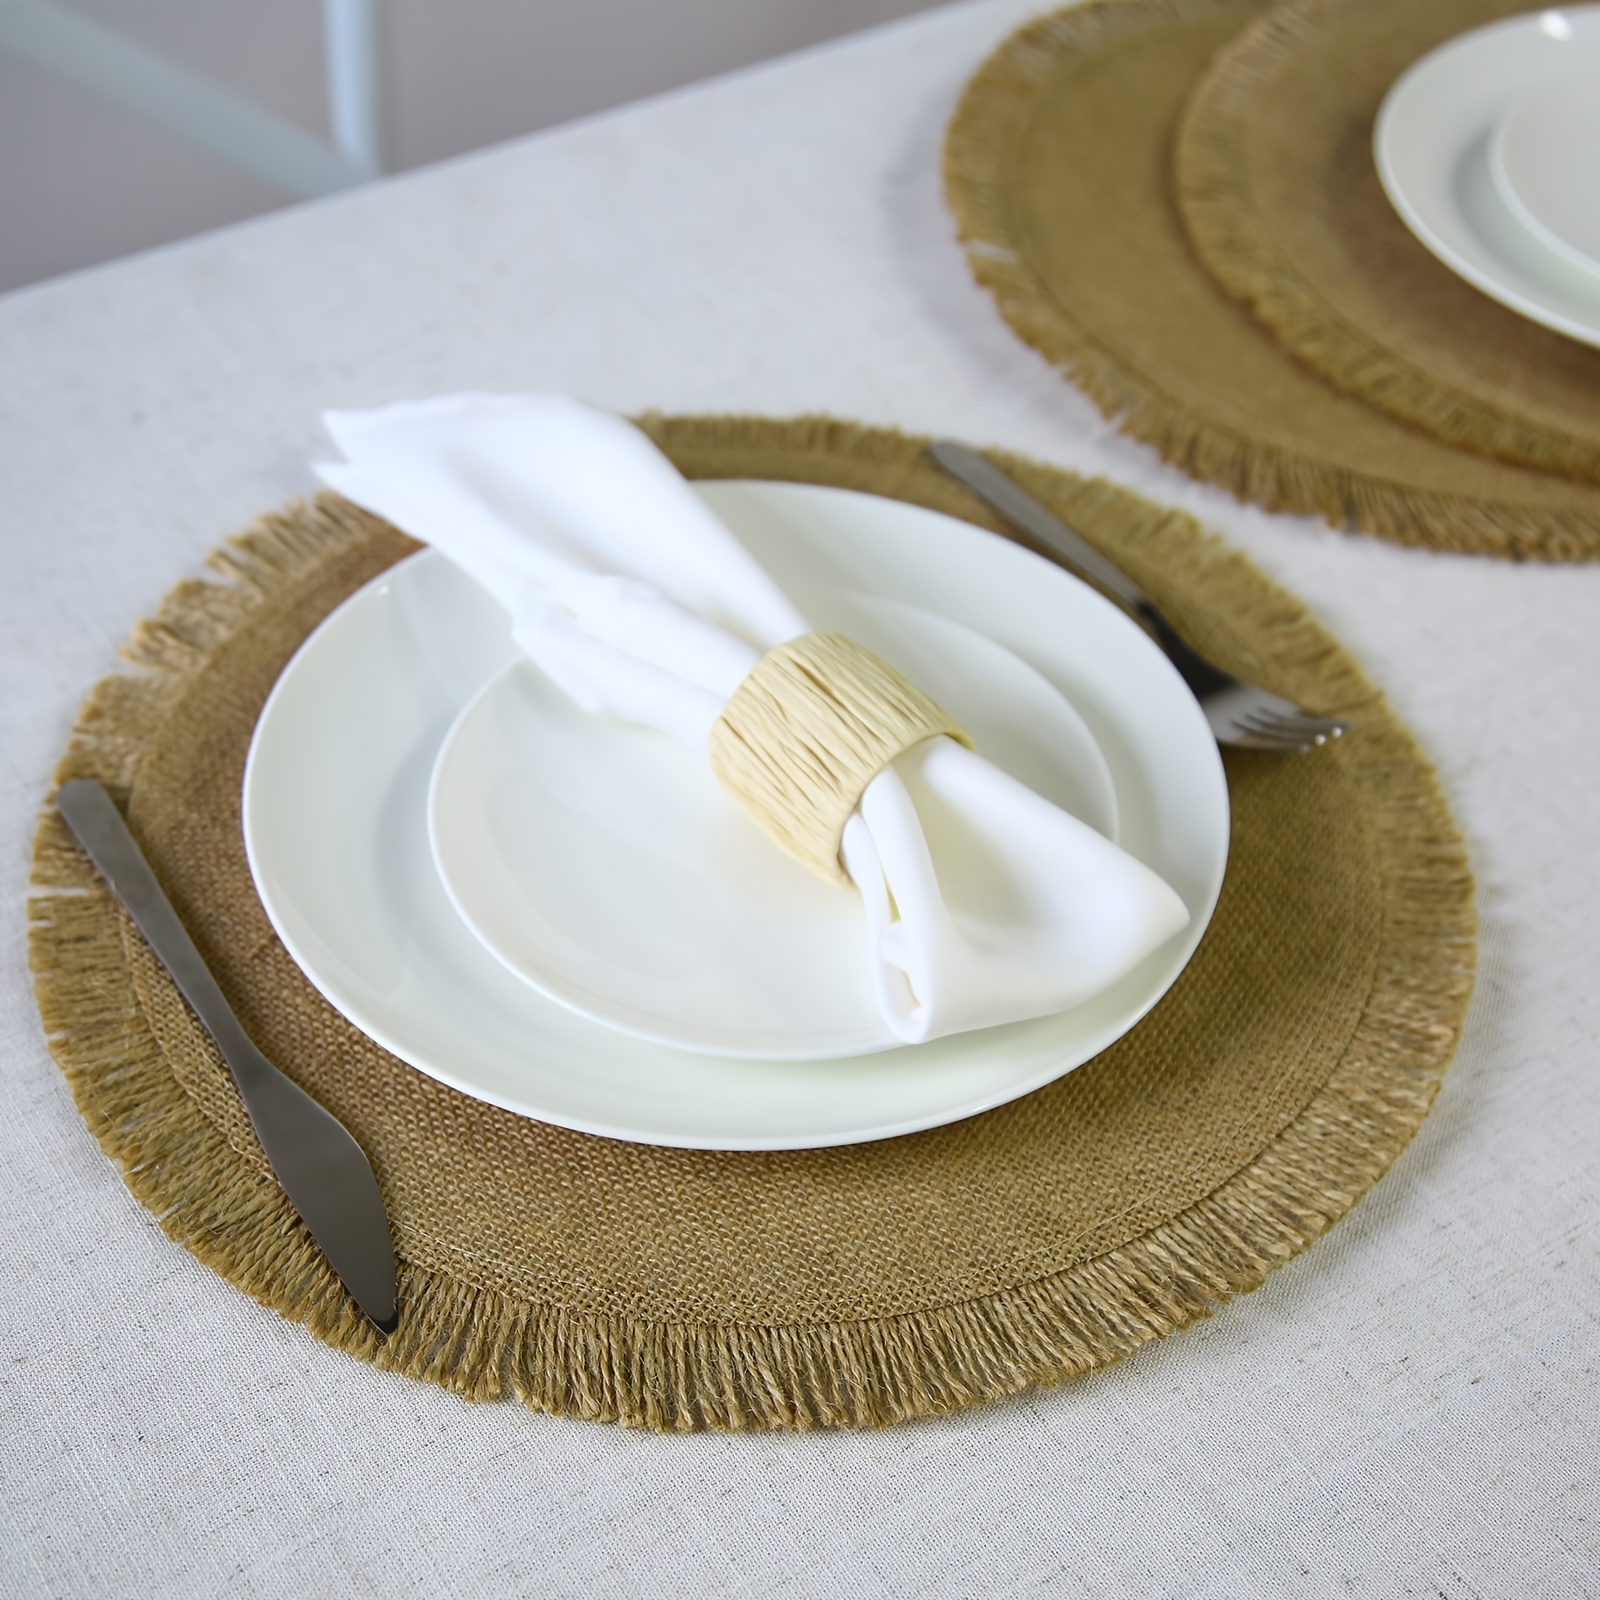 

1/4pcs, Round Linen Placemat, Natural Jute Tassel Placemats, Natural Color Round Indoor And Outdoor Daily Decoration Mats, Design Table Pad With Tassels, Home Decor